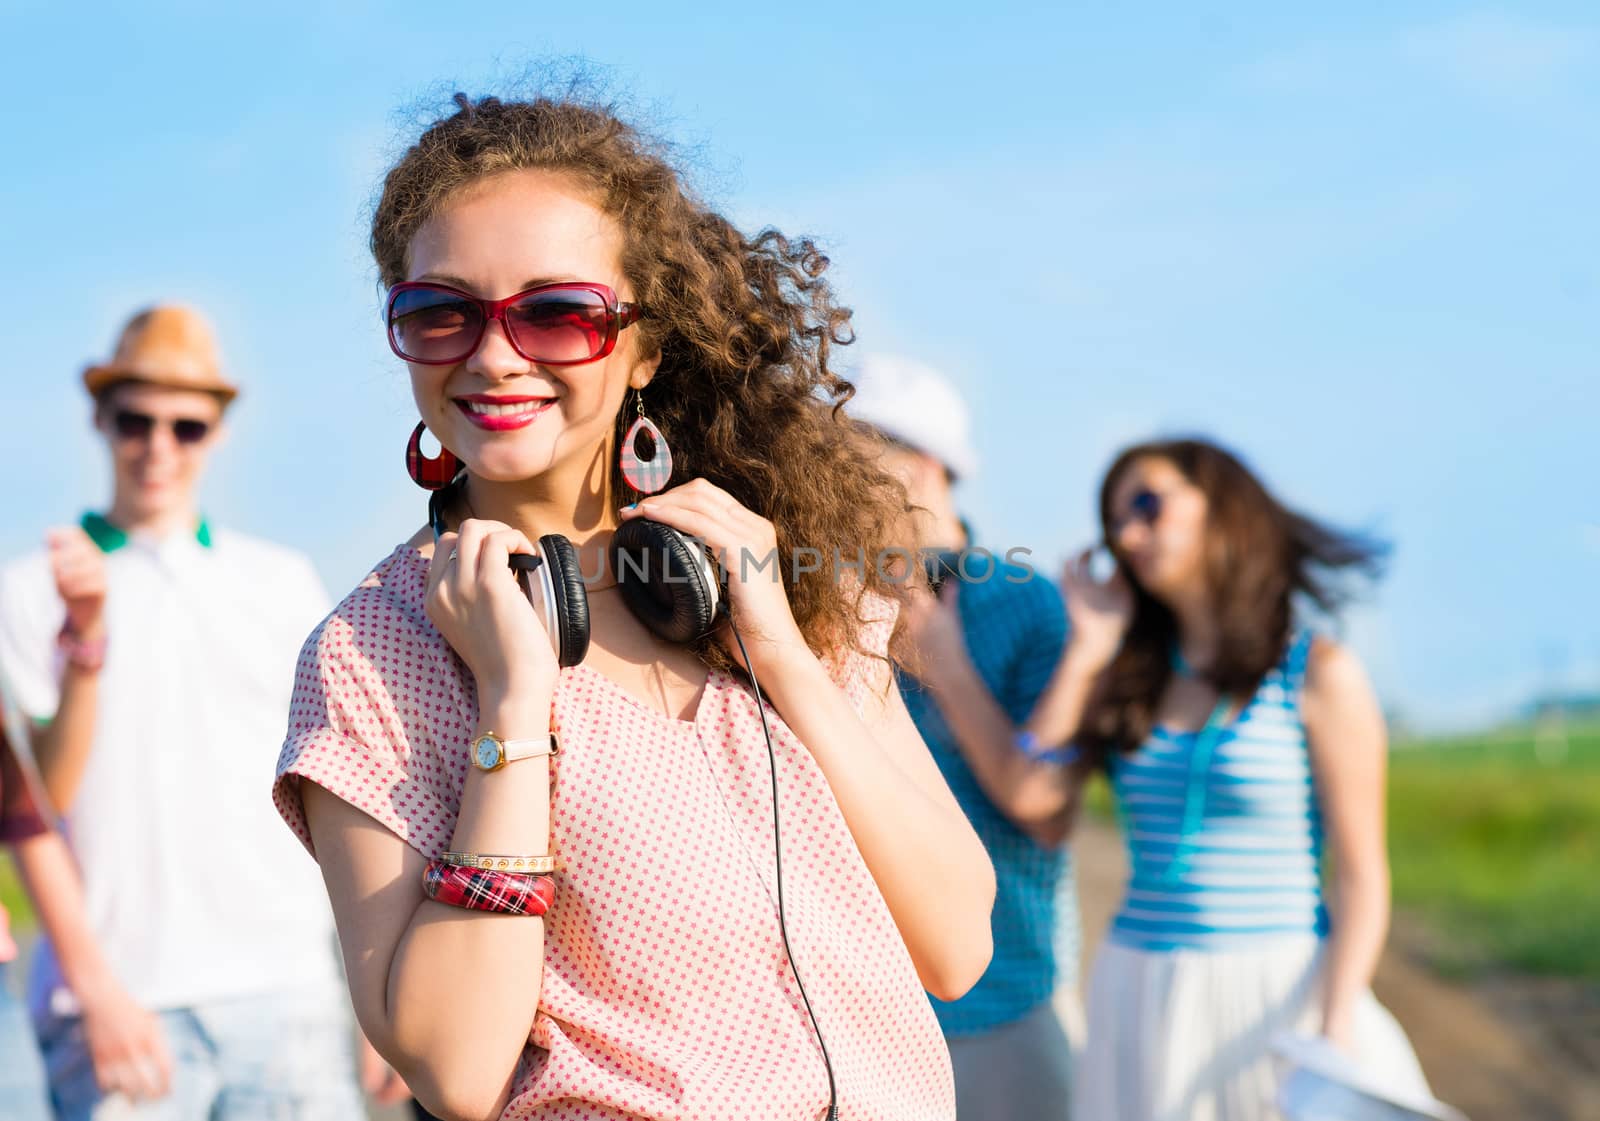 young woman with headphones on a background of blue sky and funny friends